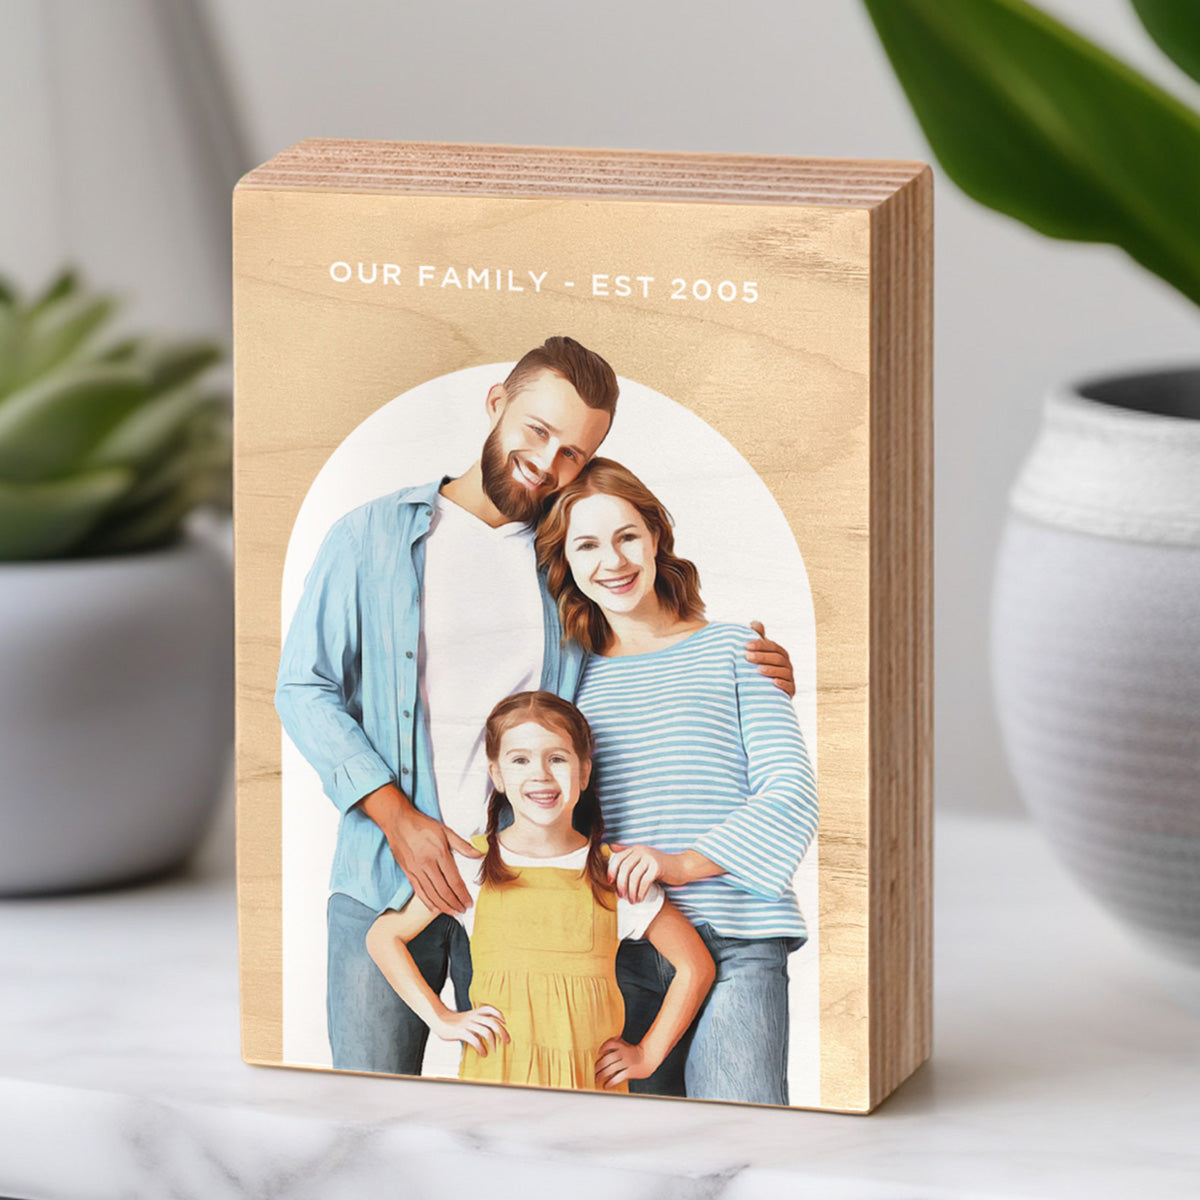 Family Portrait Painting on Wood Photo Block on a table in a home next to some home decor items